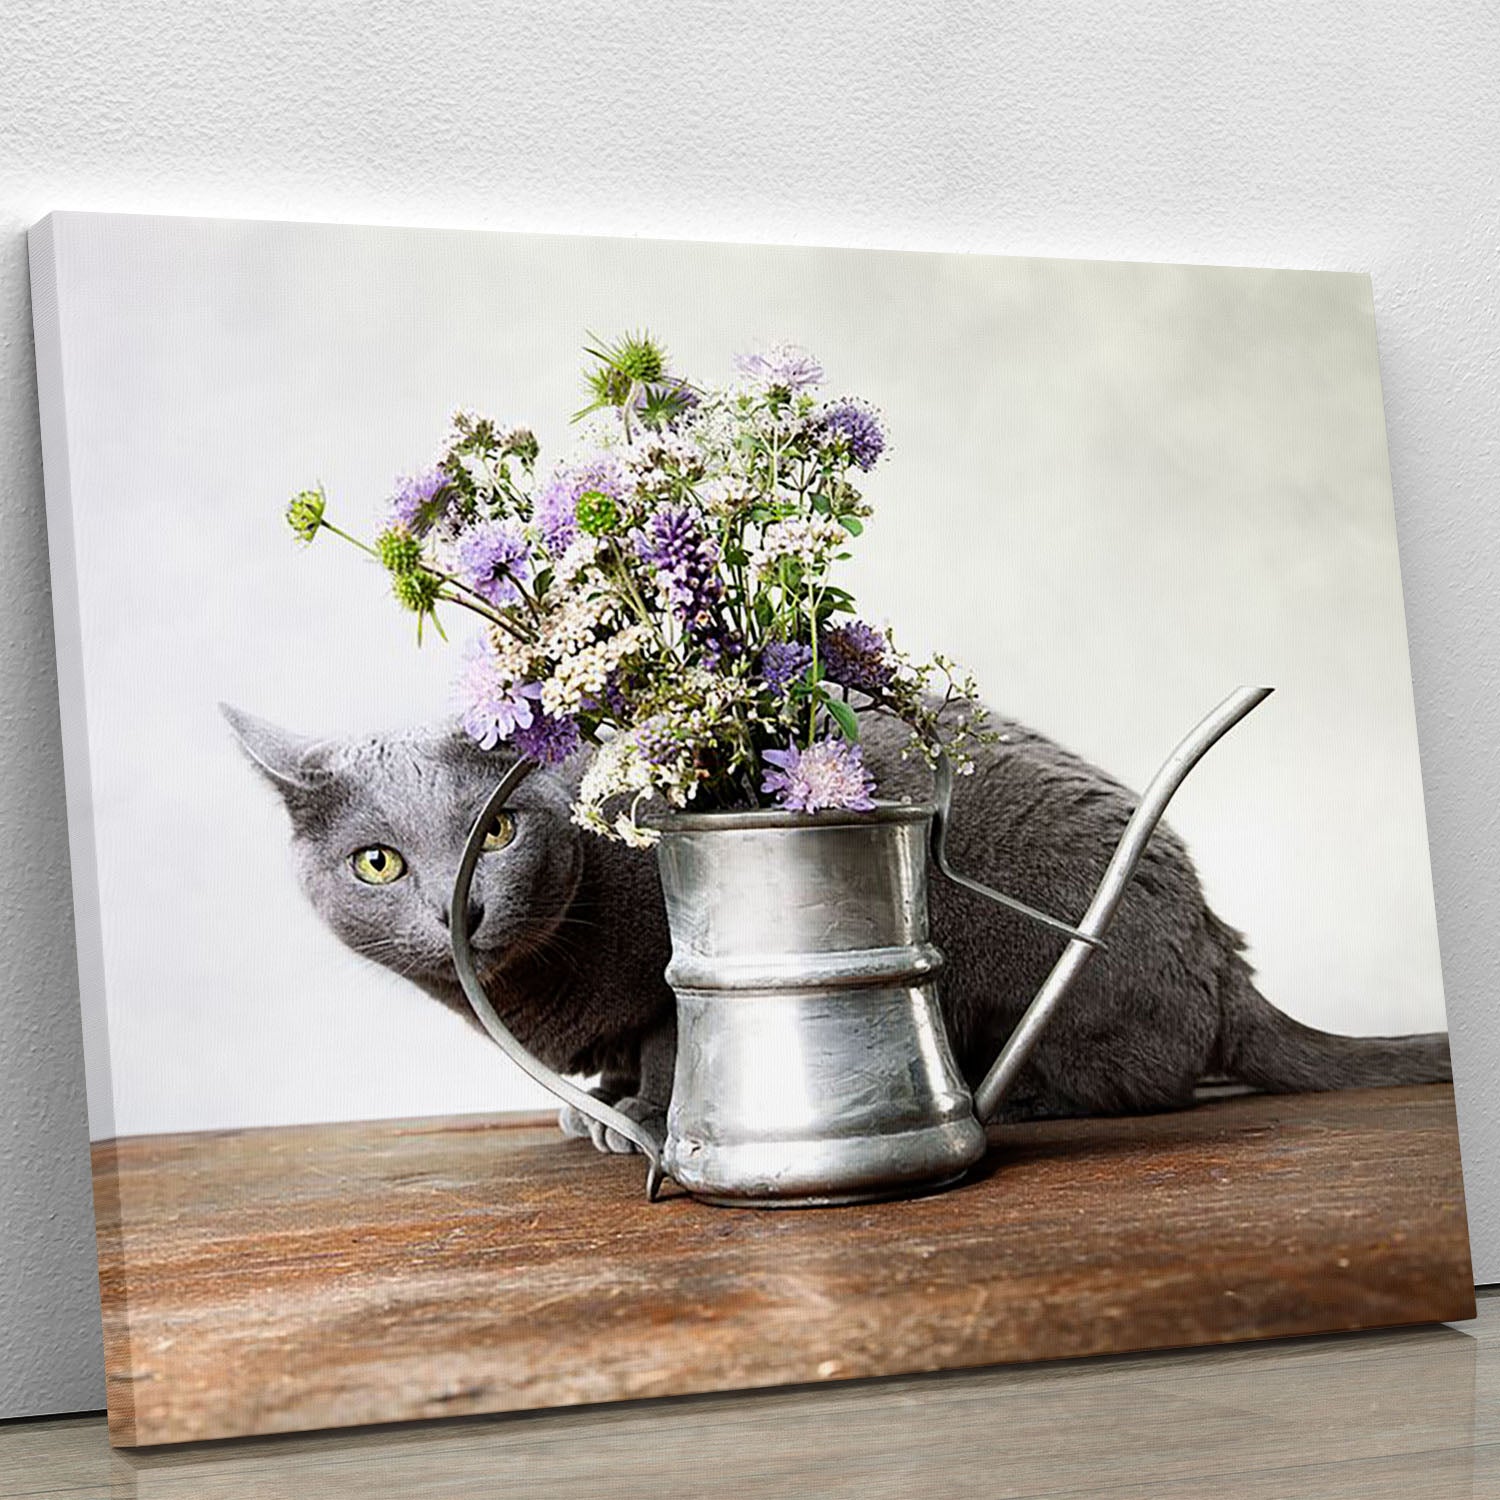 Cat with Flowers Canvas Print or Poster - Canvas Art Rocks - 1